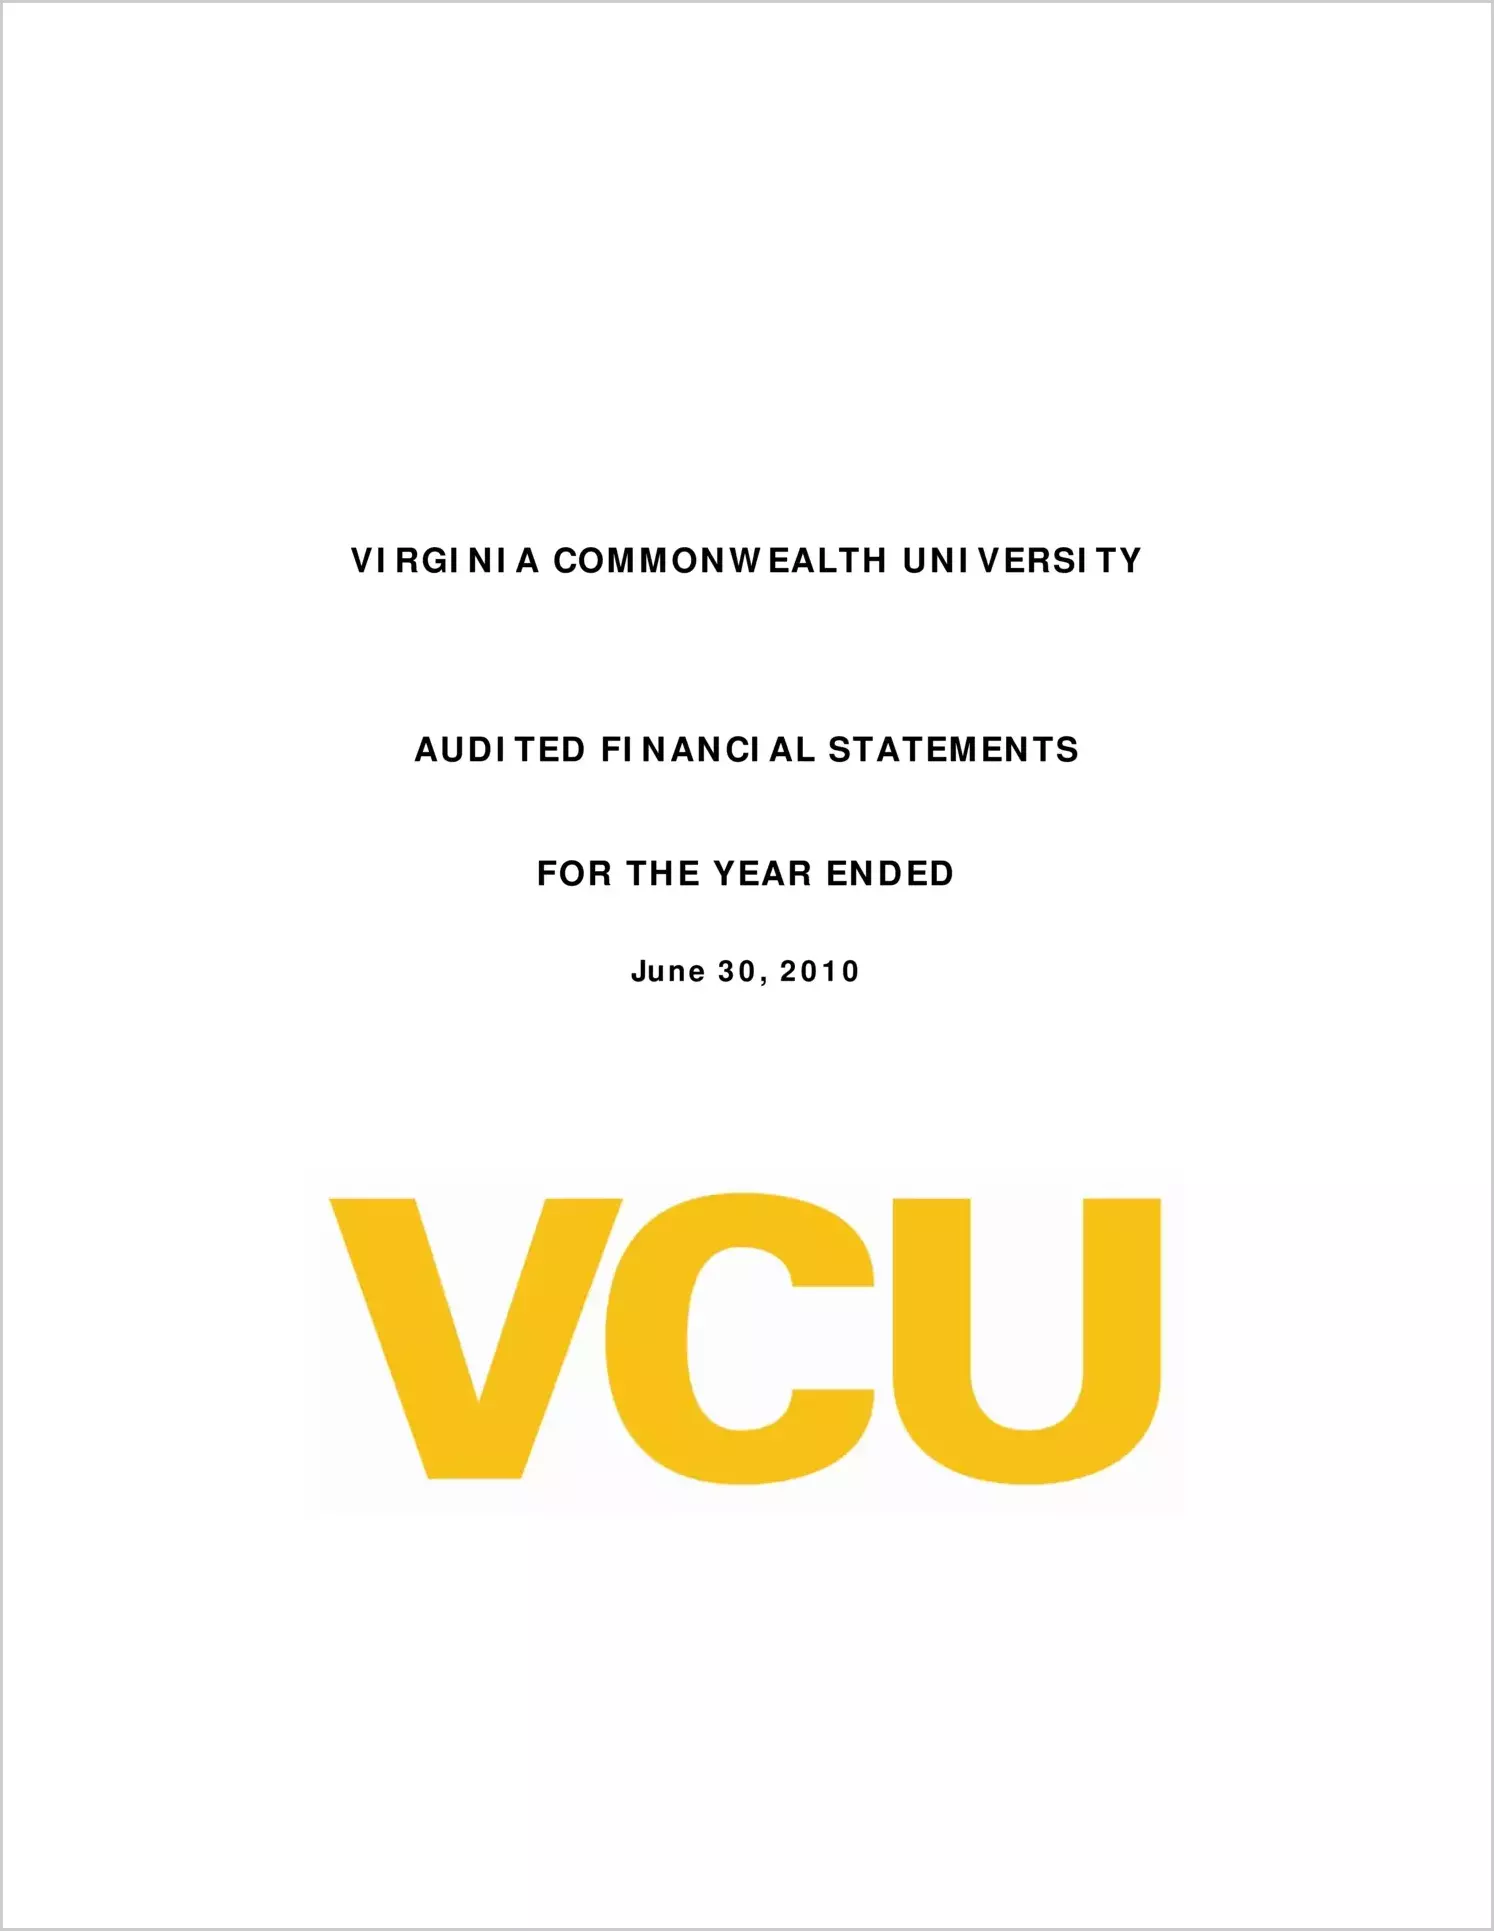 Virginia Commonwealth University Financial Statements for the year ended June 30, 2010